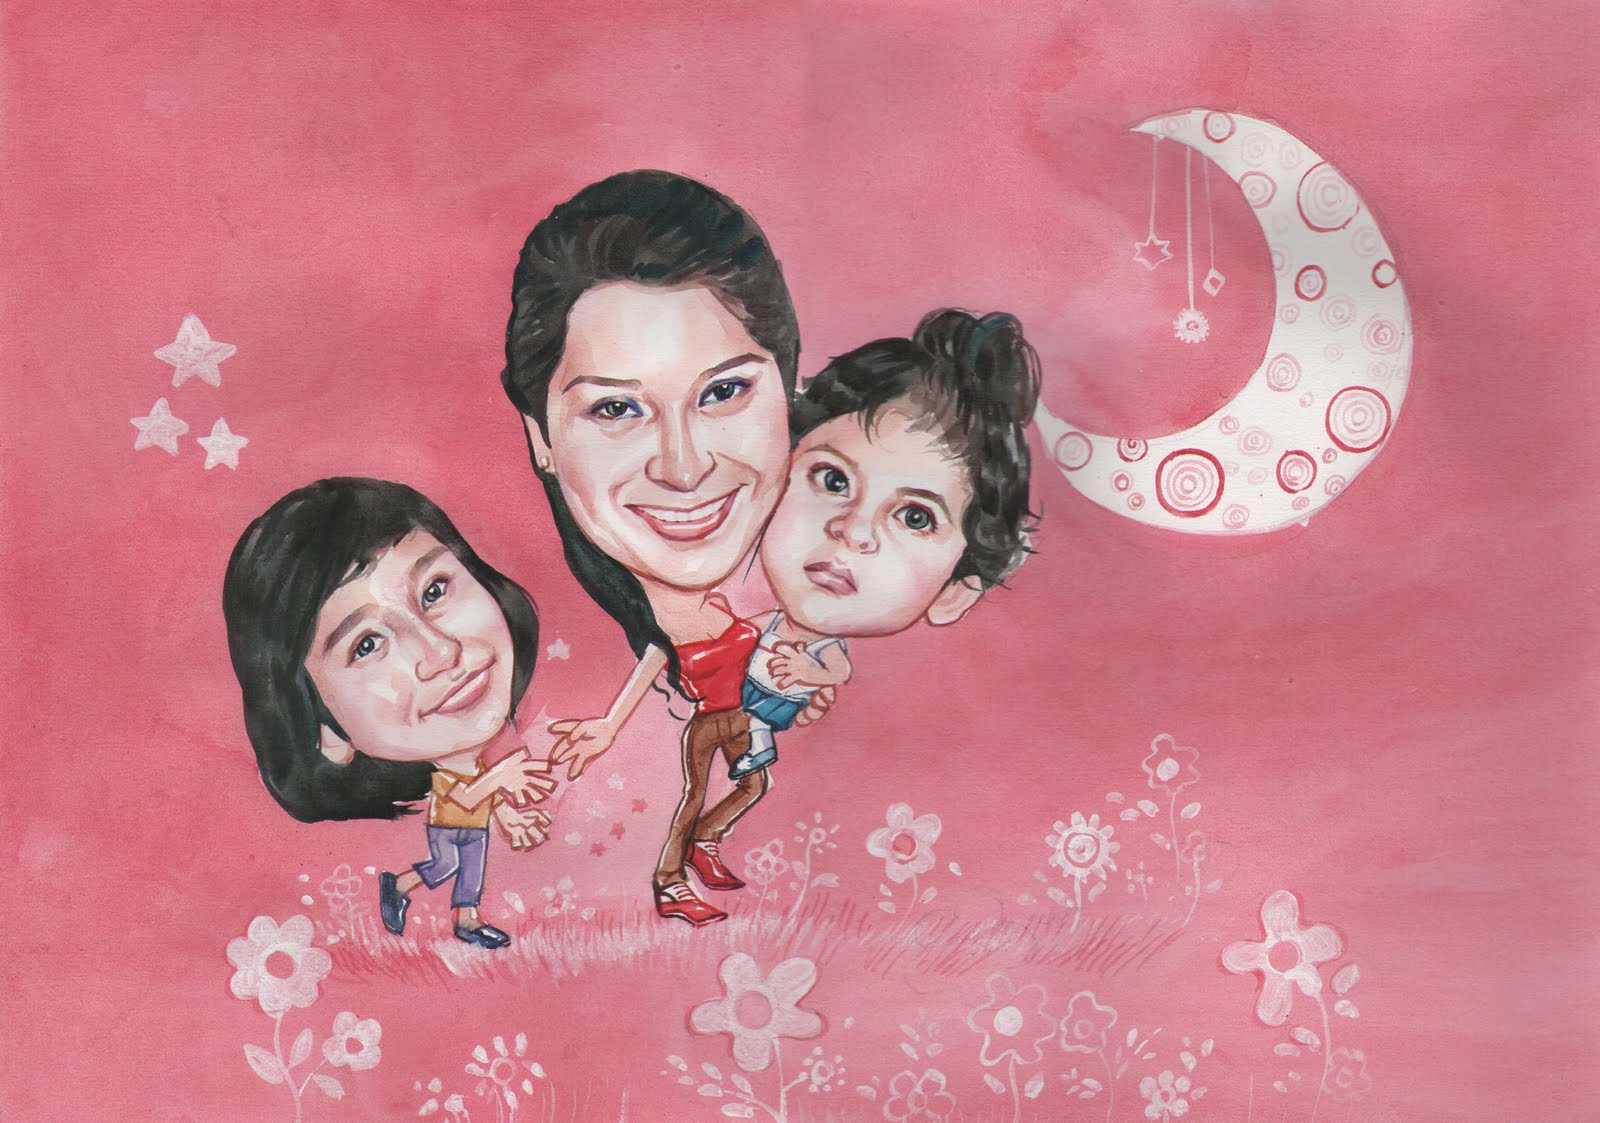 Hope the client from Singapore likes this watercolor caricature ...